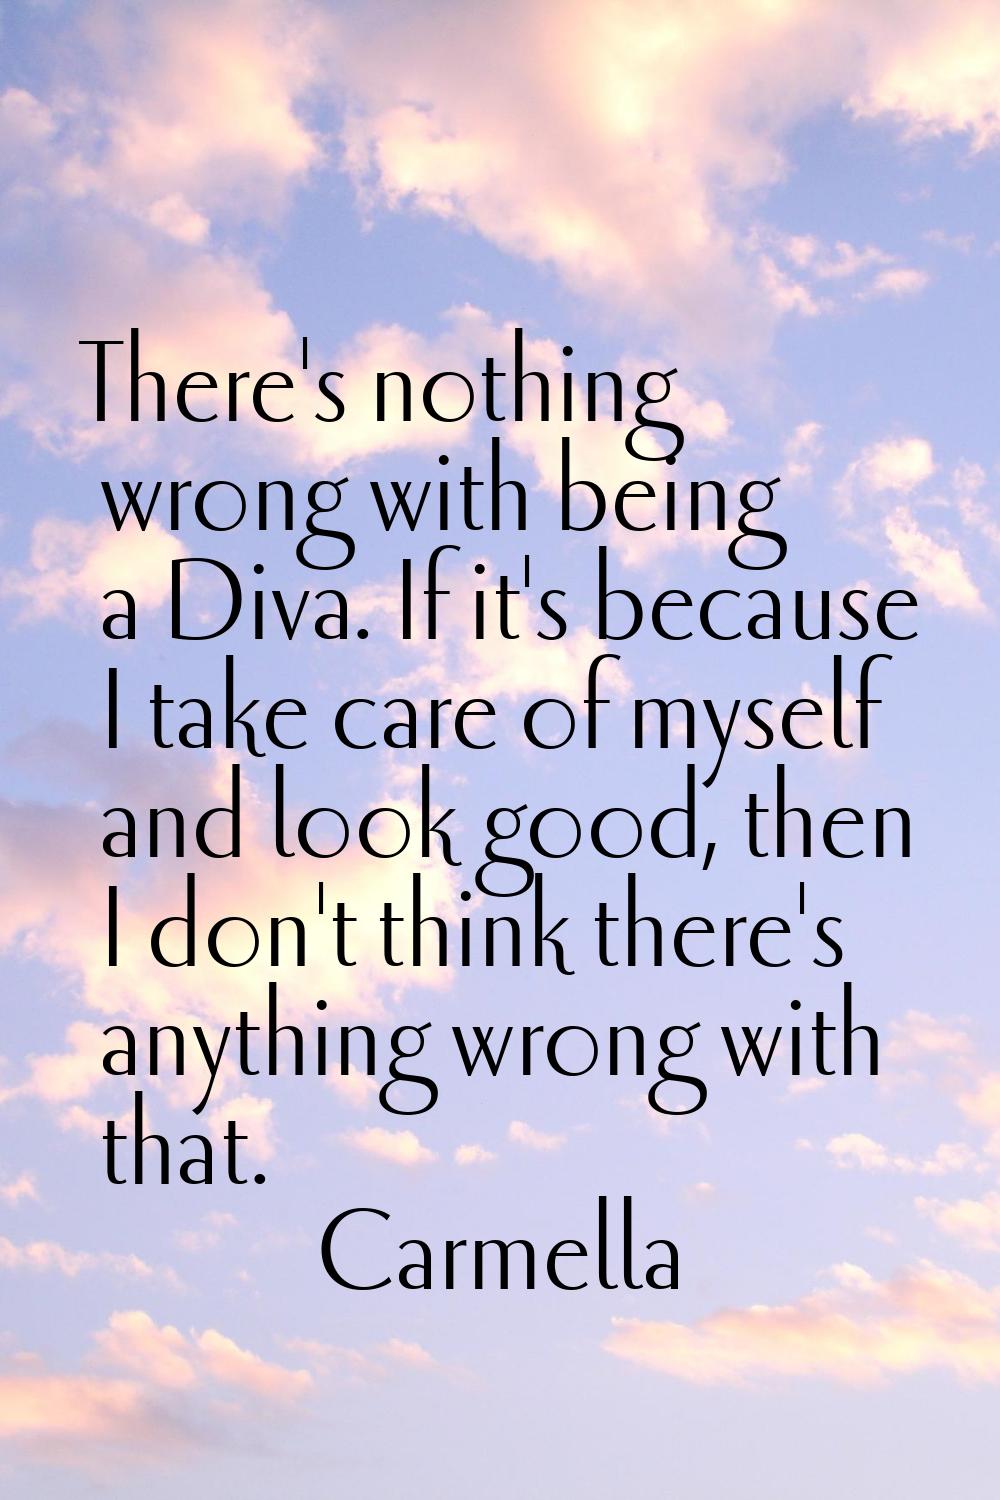 There's nothing wrong with being a Diva. If it's because I take care of myself and look good, then 